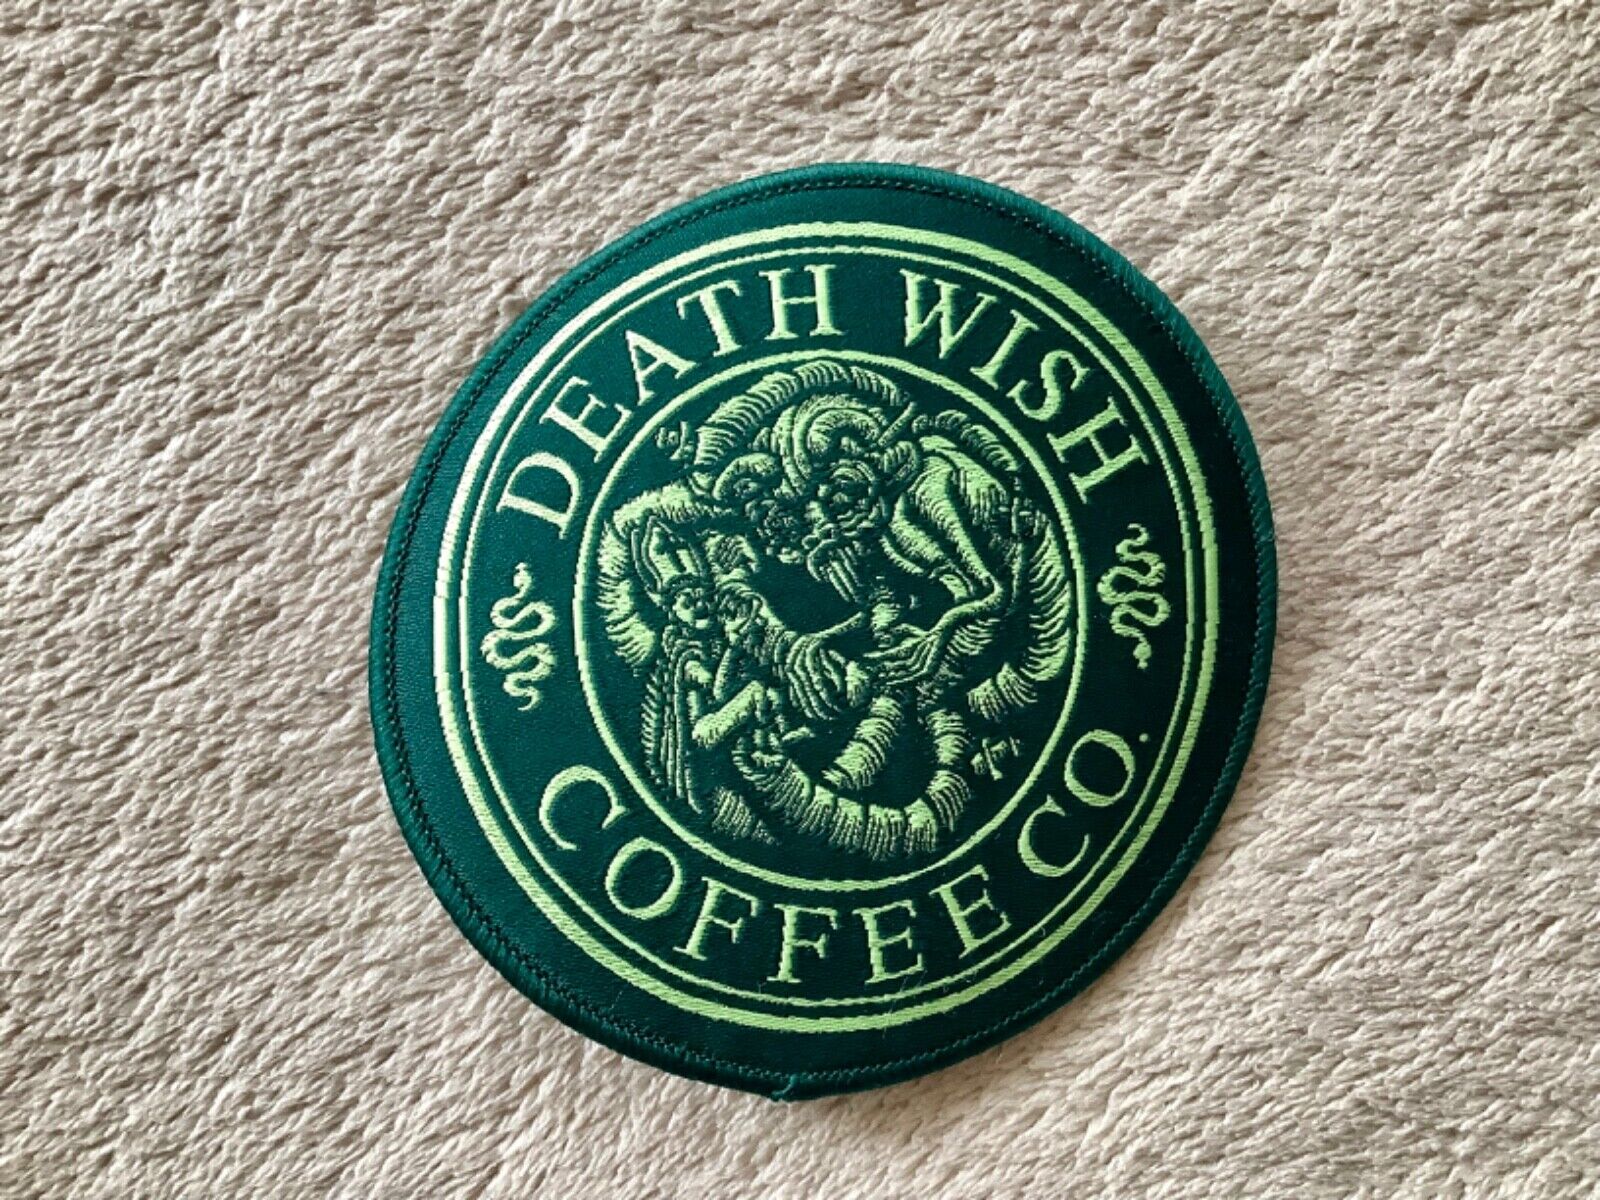 death wish coffee st patrick’s patch mug swag collectibles 